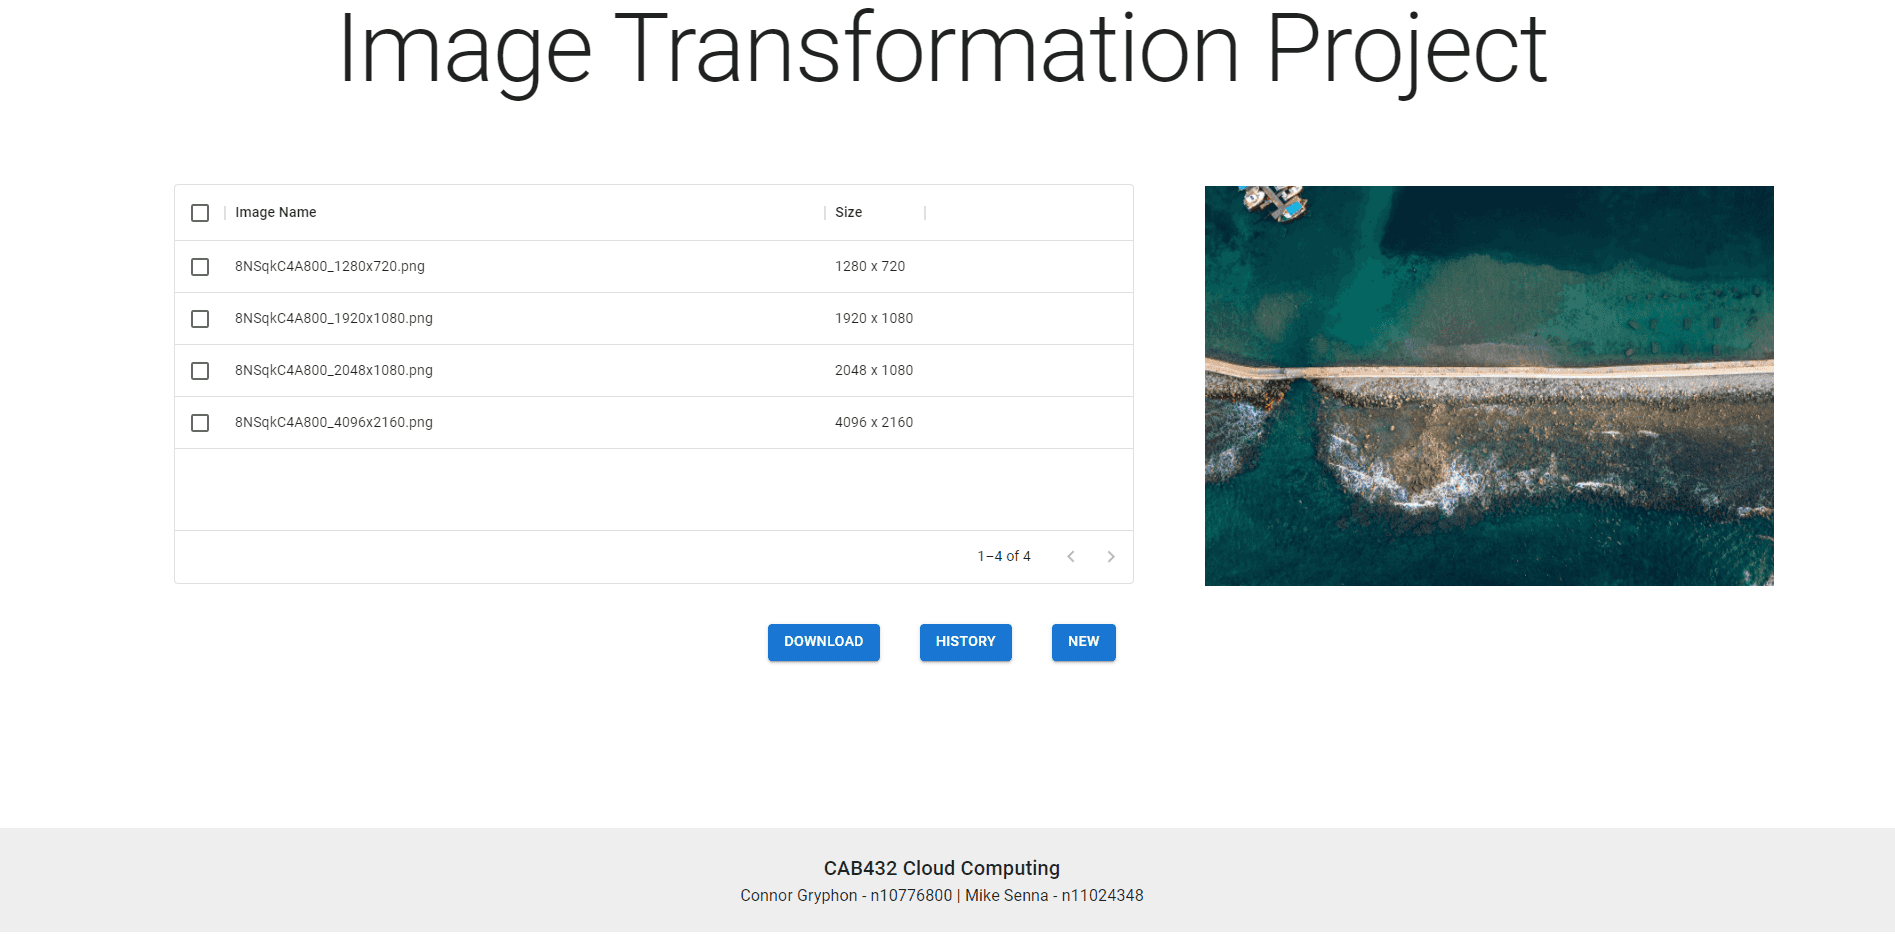 Picture of image transformation project screen.